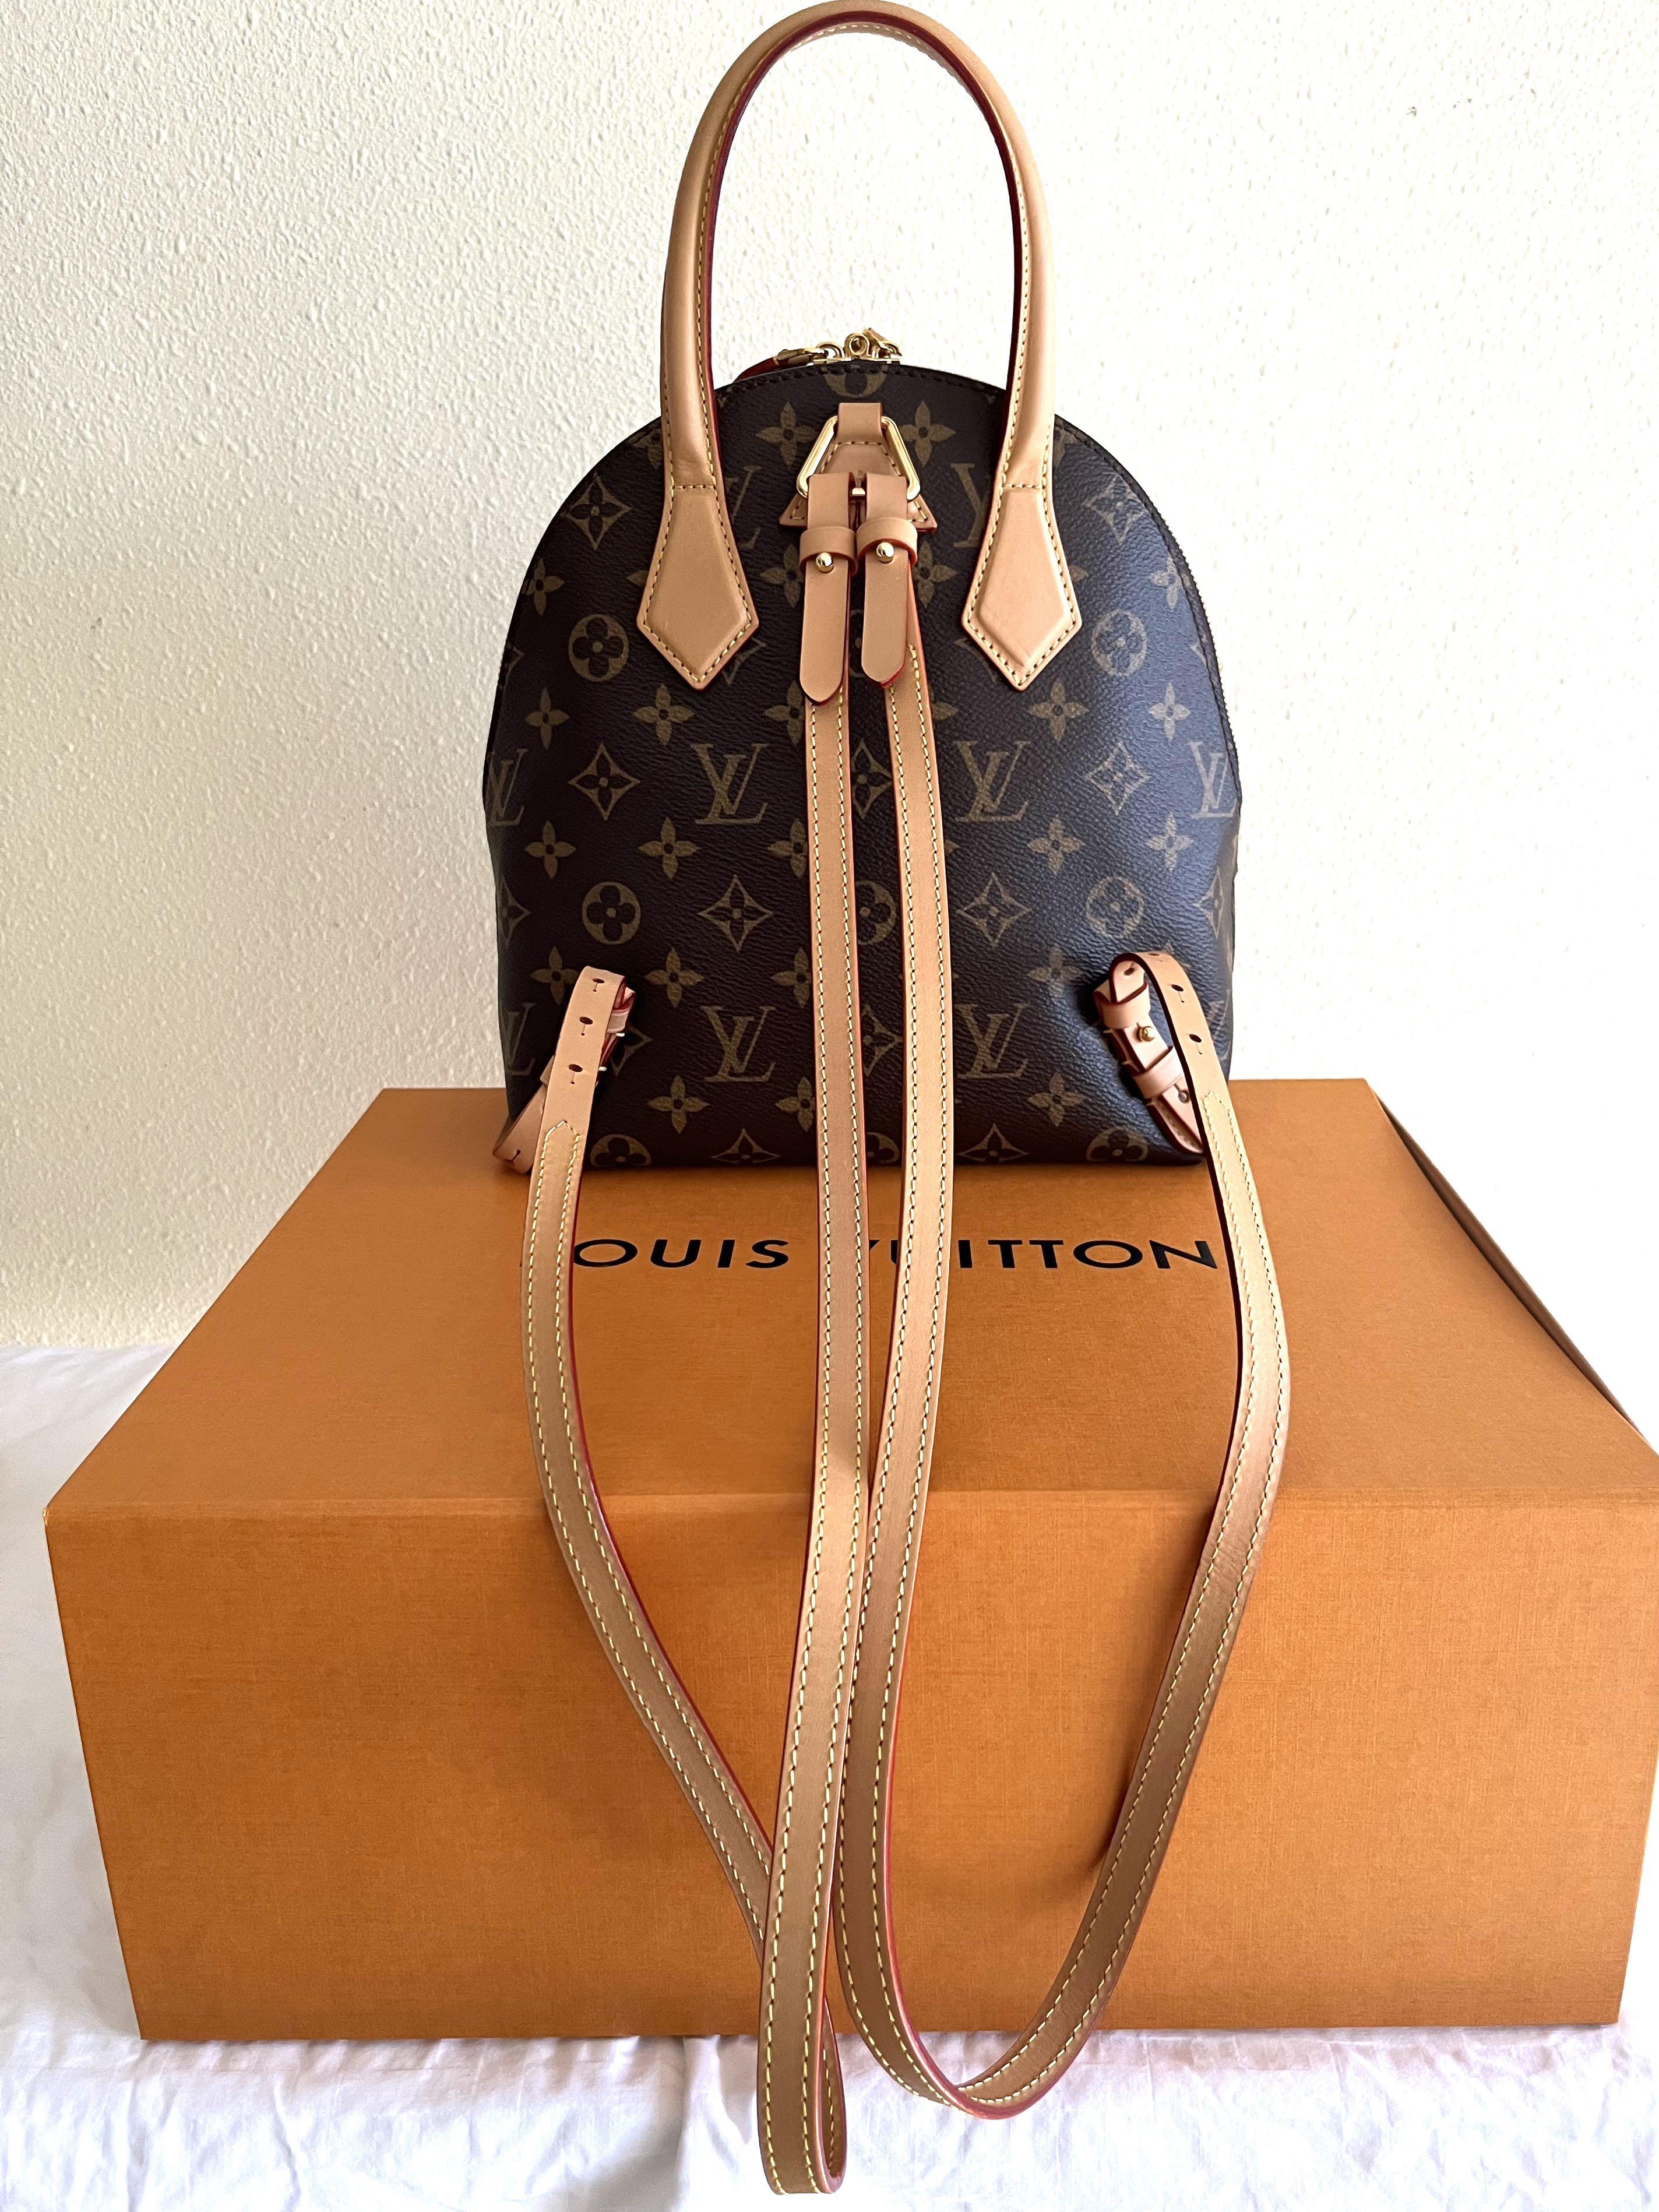 grumpycherry on X: Louis Vuitton Moon Backpack 🌸 For the Louis